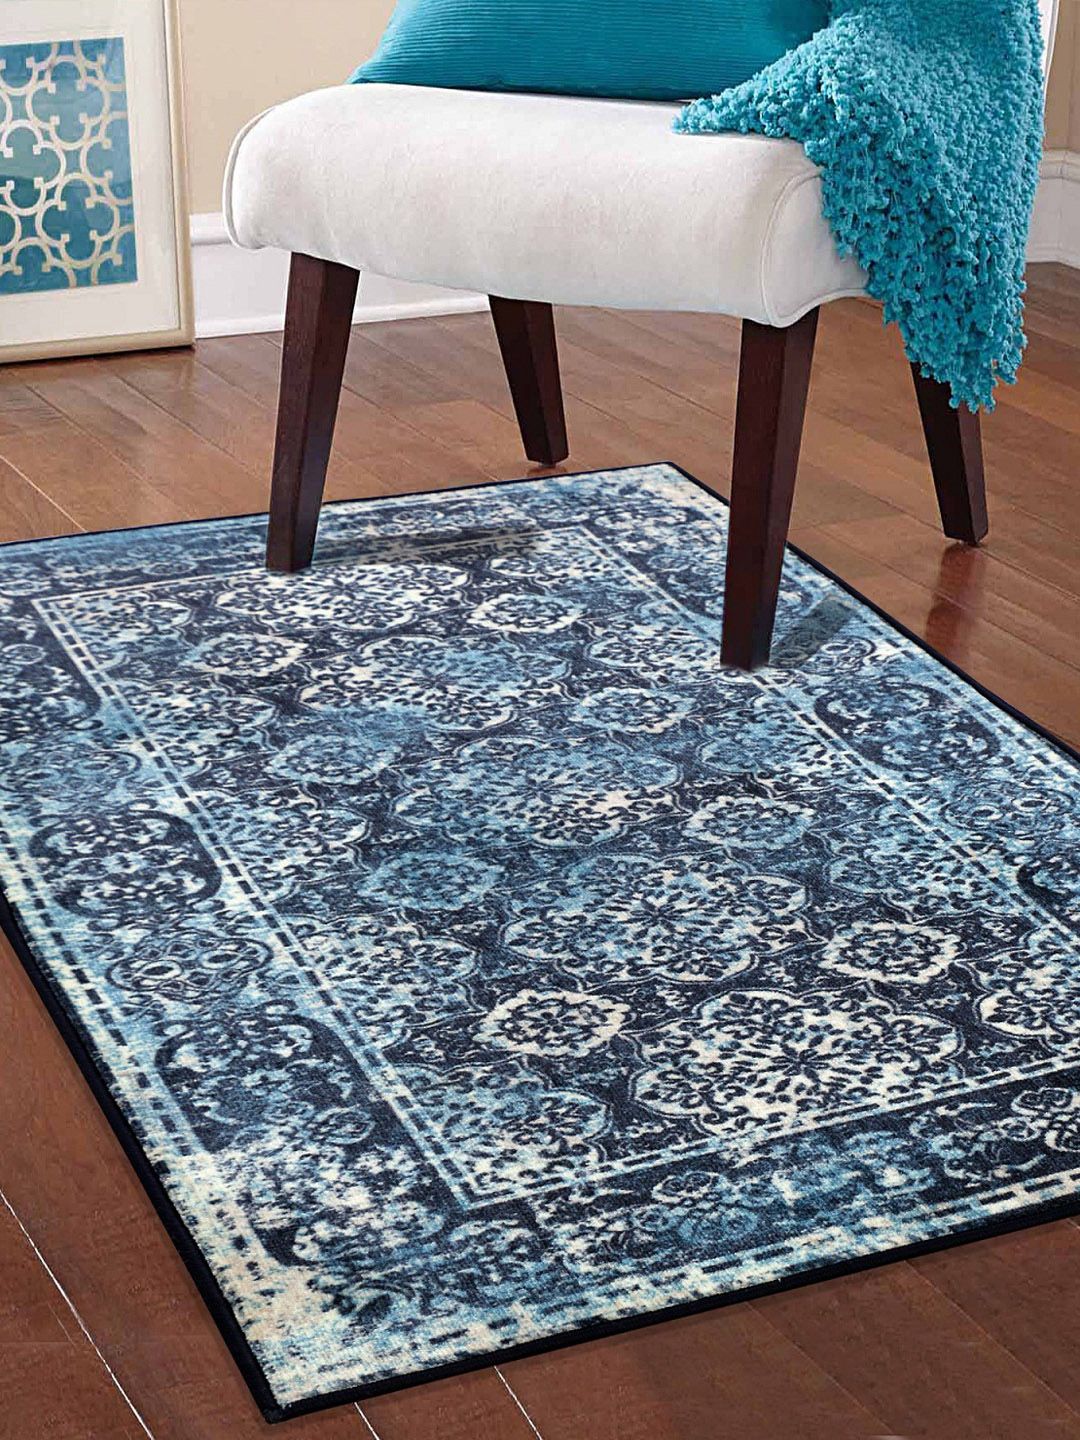 RUGSMITH Premium Blue Patterned No-Shred Carpet Price in India